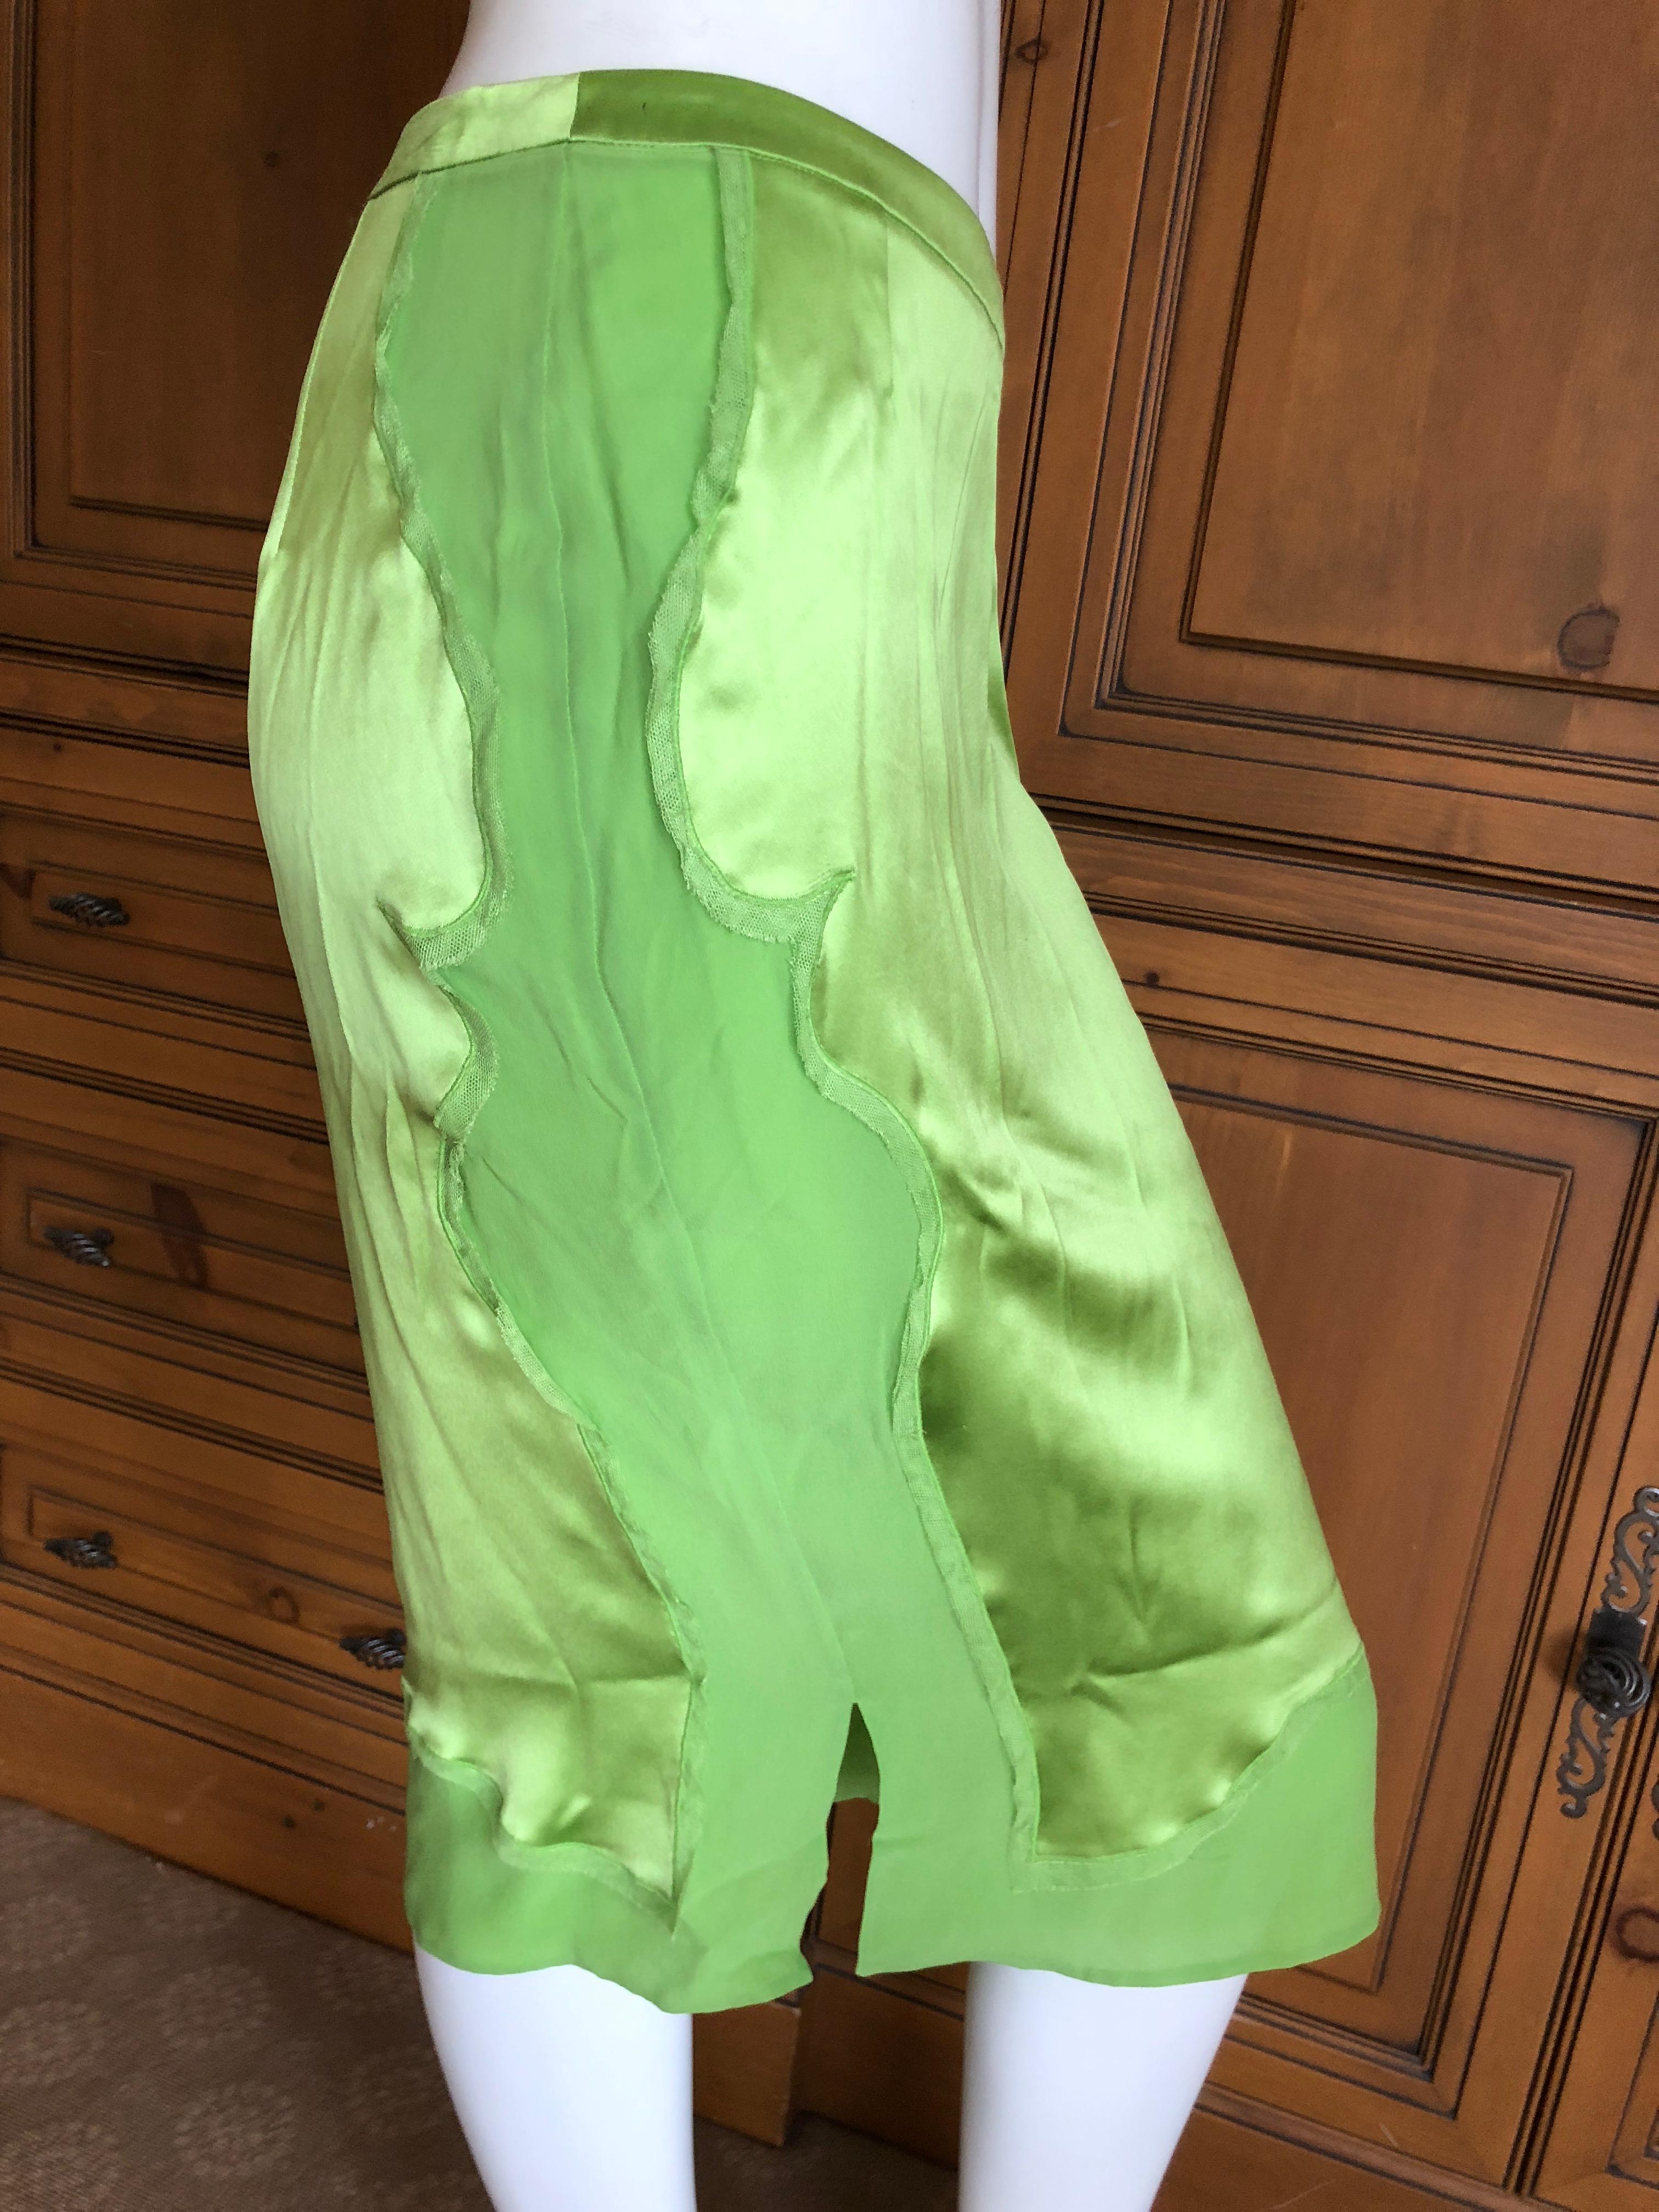 Yves Saint Laurent by Tom Ford 2004 Bright Green Silk Skirt.
 New with Tags
 Sz 38
Waist: 28